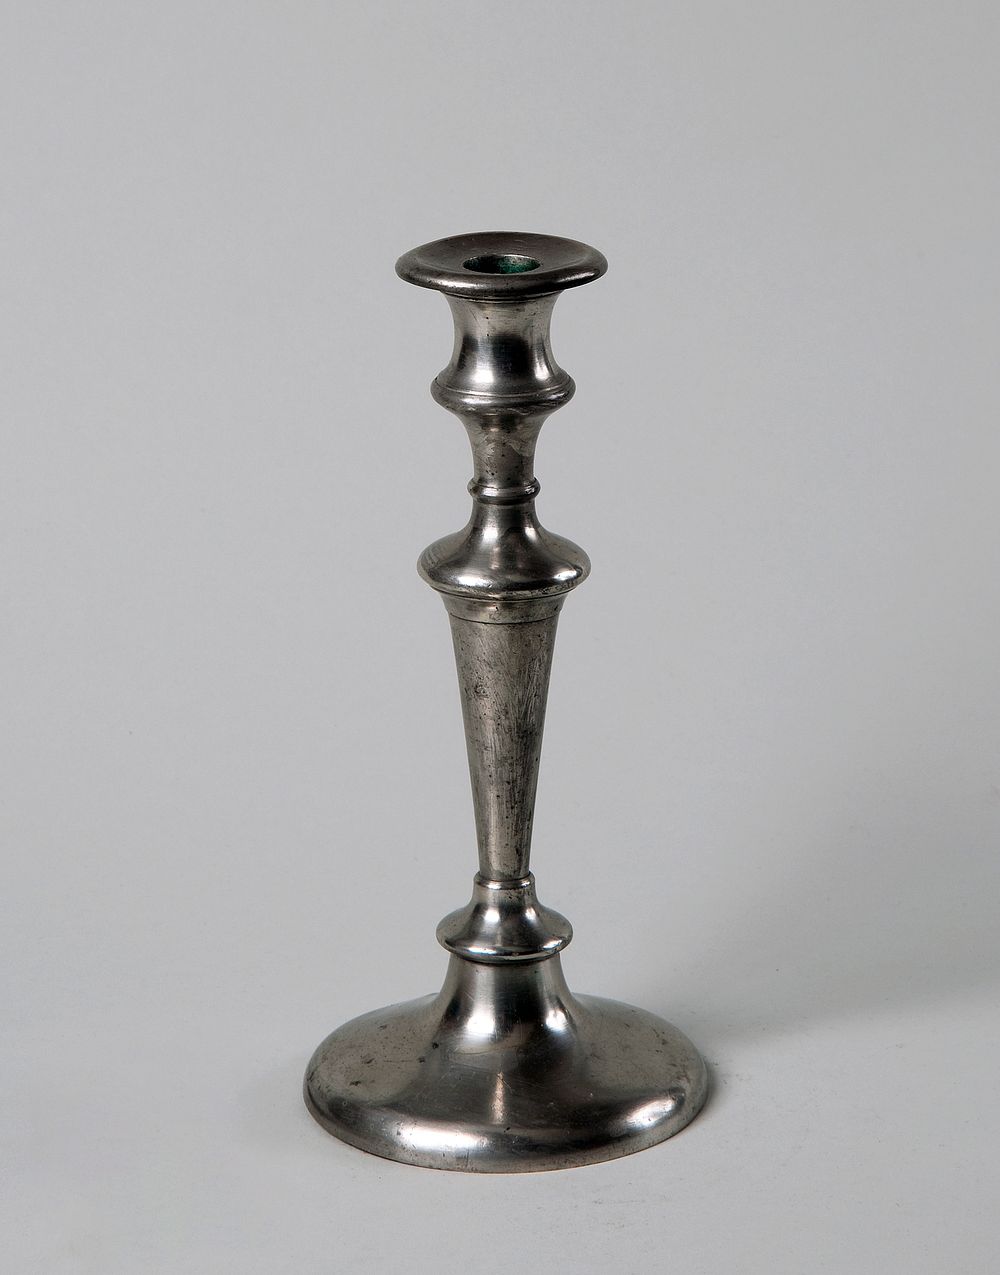 Candlestick by Thomas Wildes